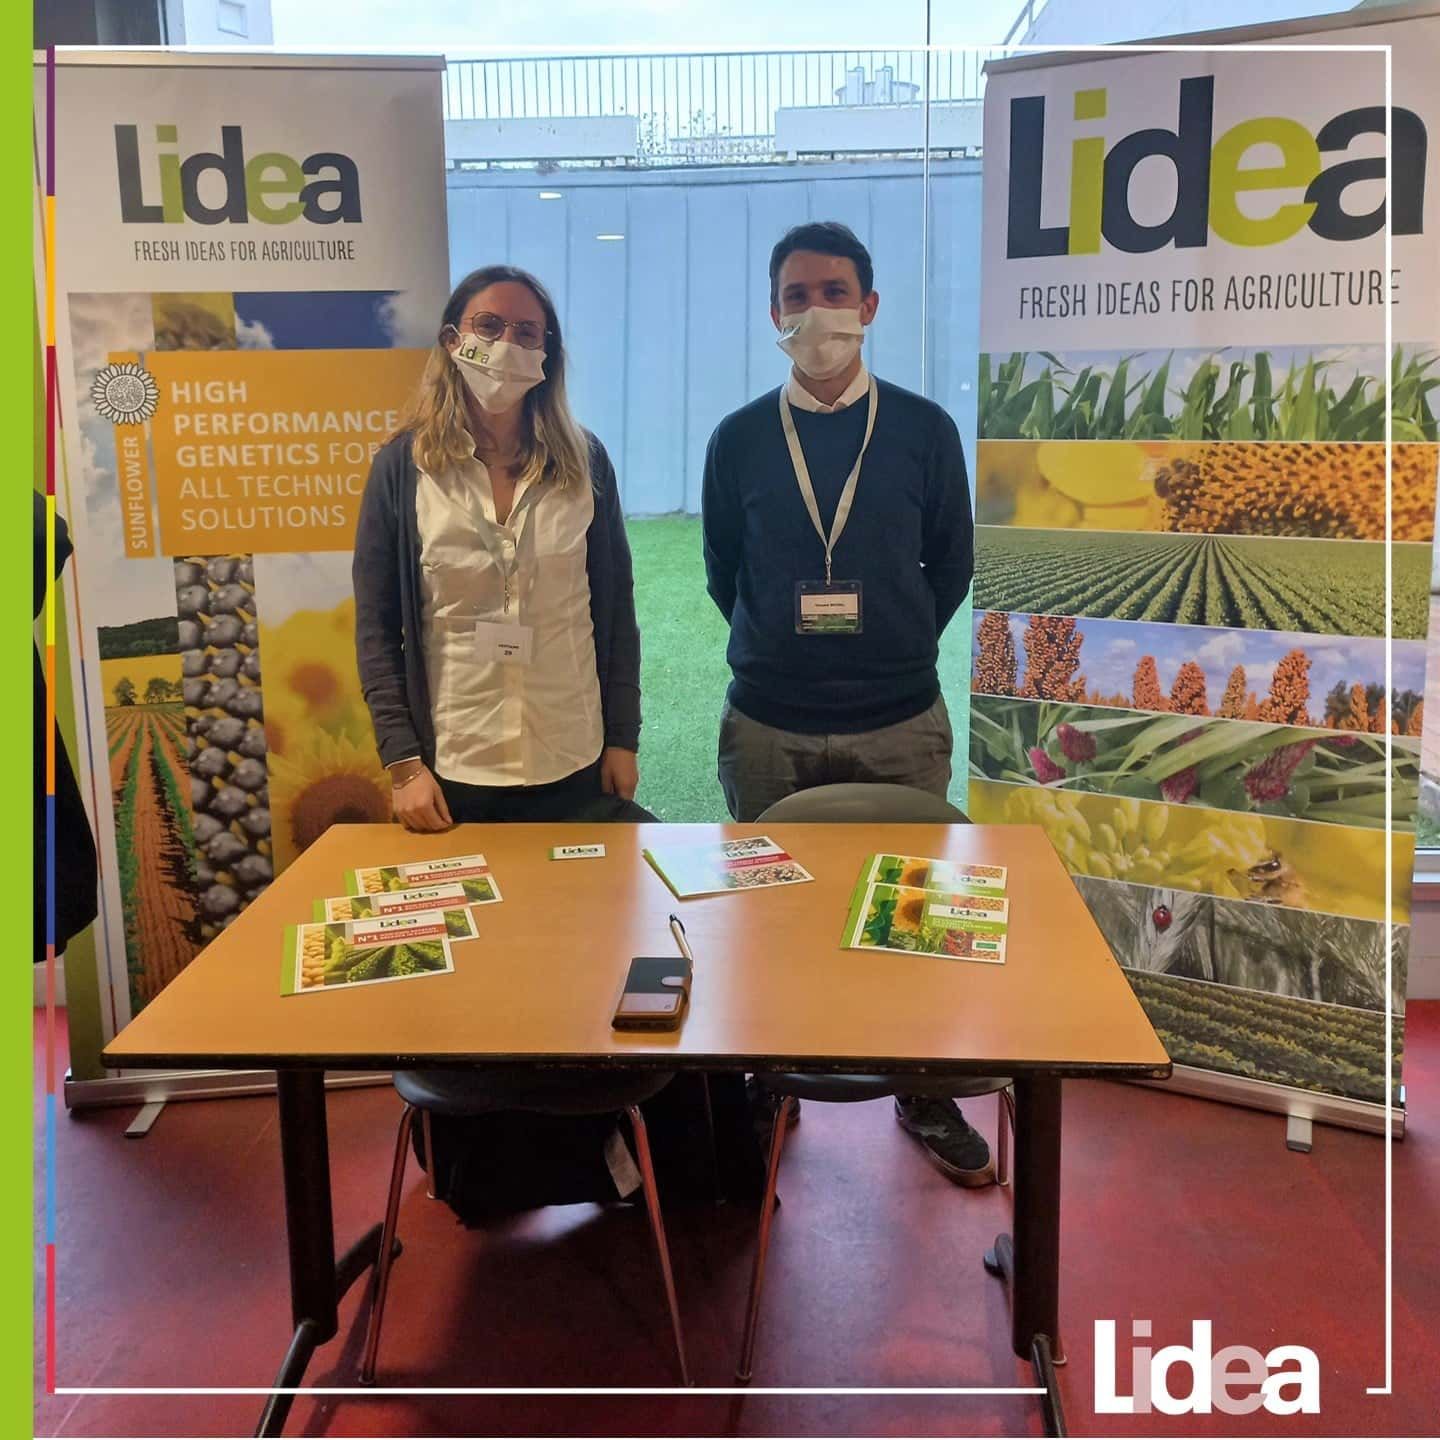 Lidea sponsors the colloquium on Plant Health in Toulouse